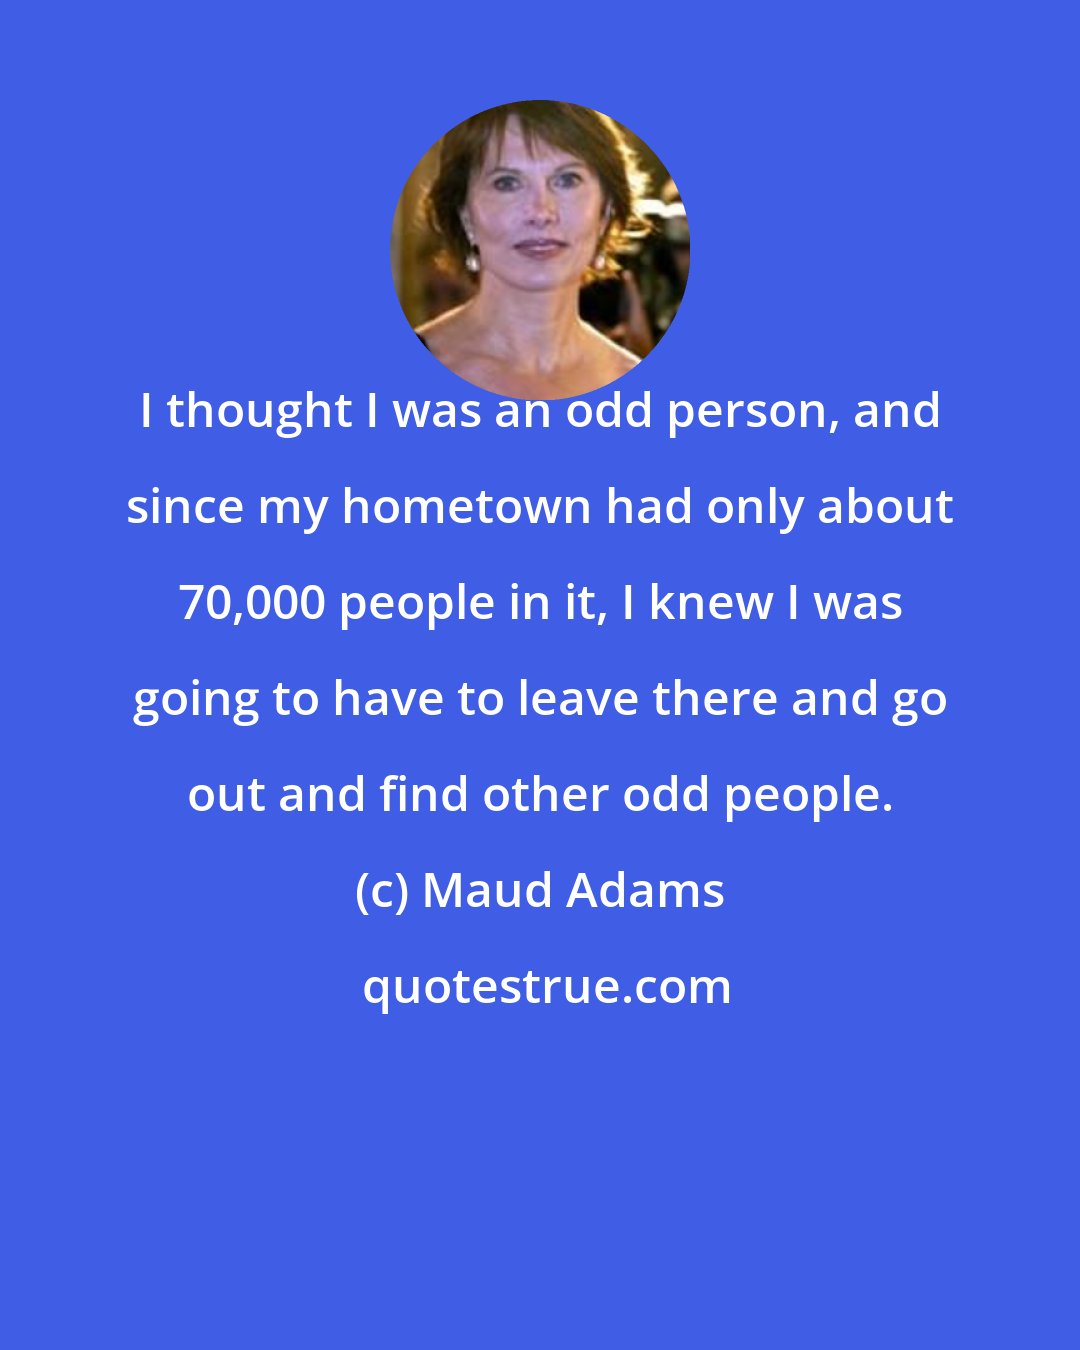 Maud Adams: I thought I was an odd person, and since my hometown had only about 70,000 people in it, I knew I was going to have to leave there and go out and find other odd people.